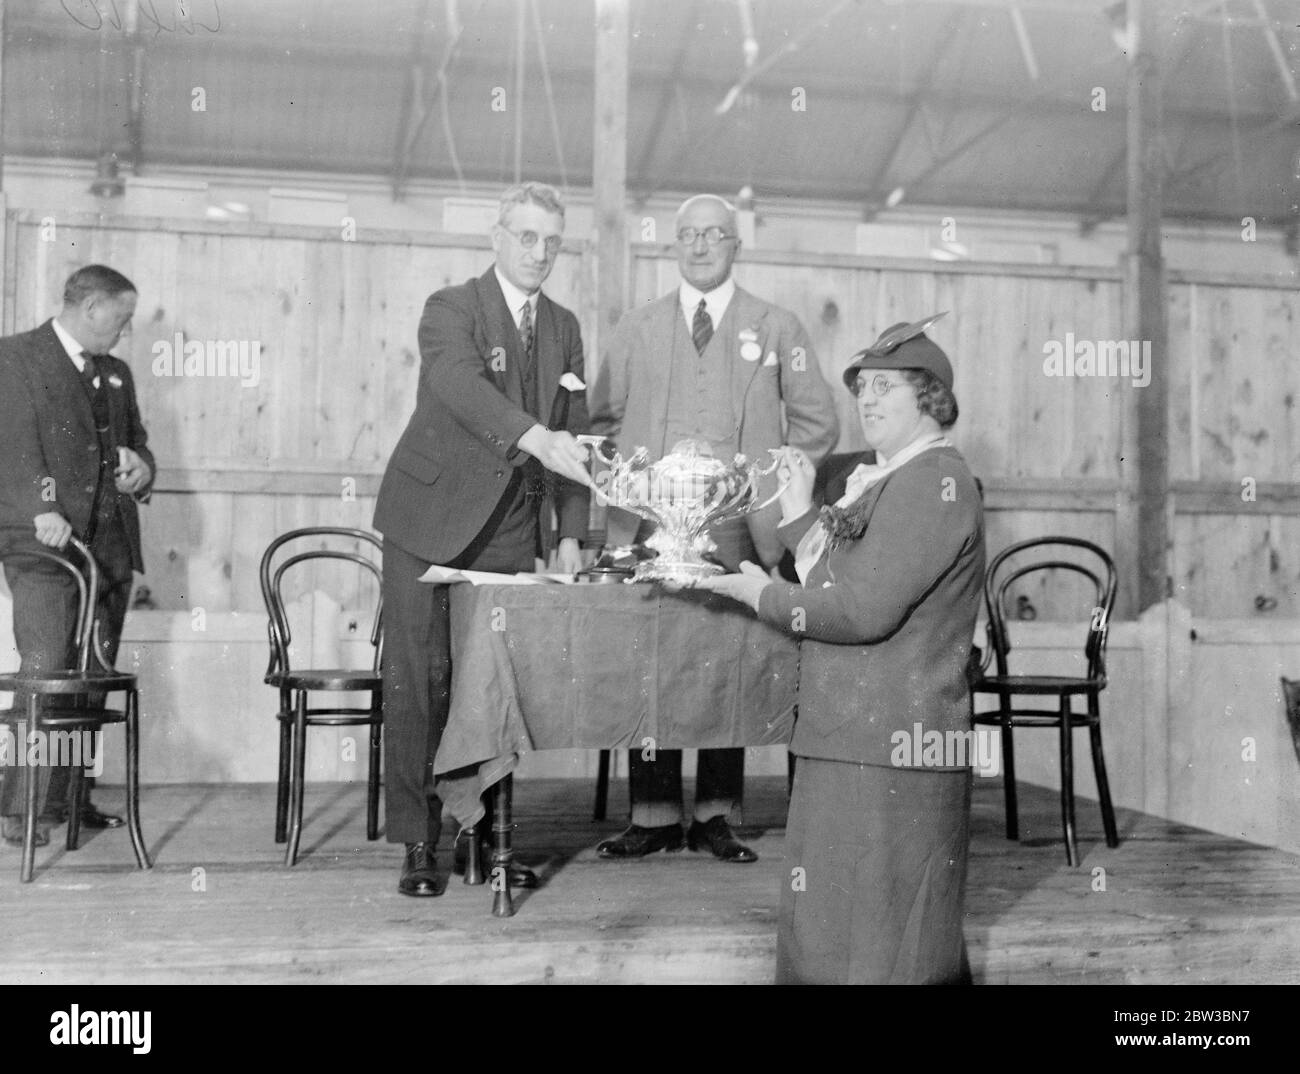 Berkshire wins cleanest milk contest at dairy show . 23 October 1934 Stock Photo